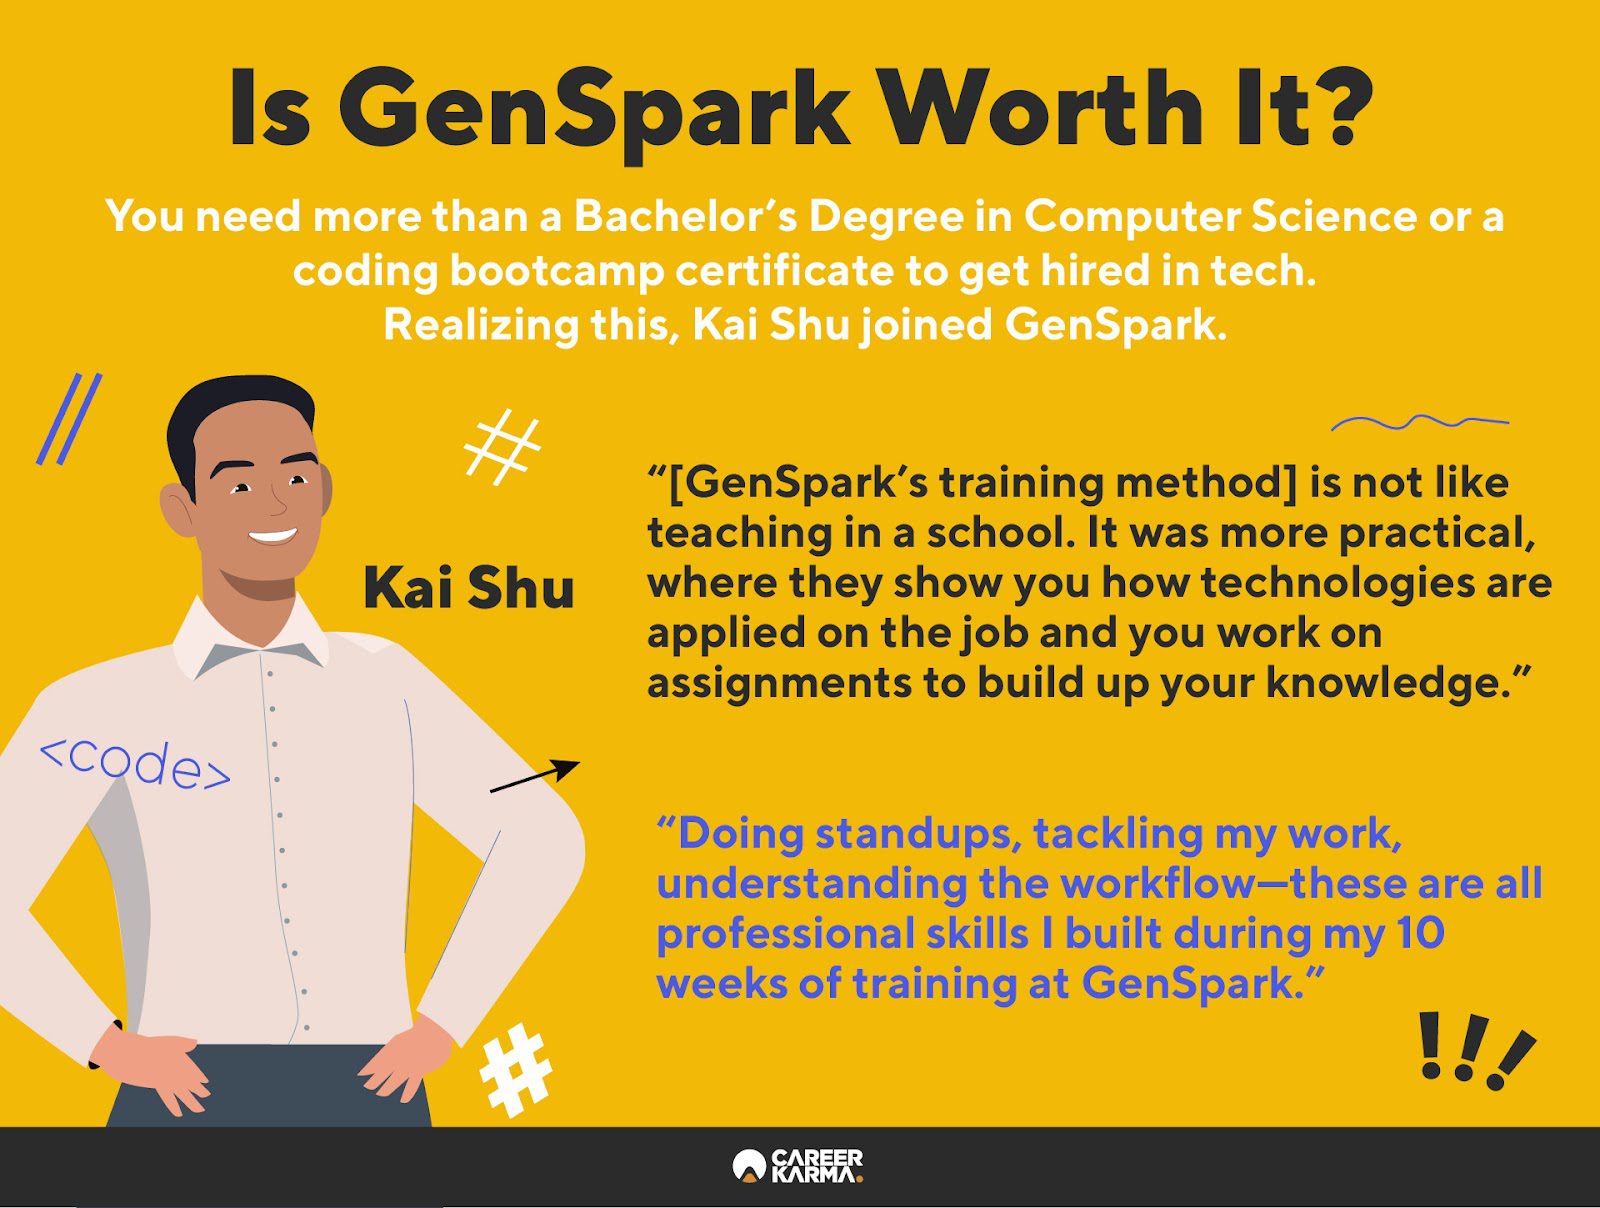 An infographic featuring GenSpark participant Kai Shu’s review of the program